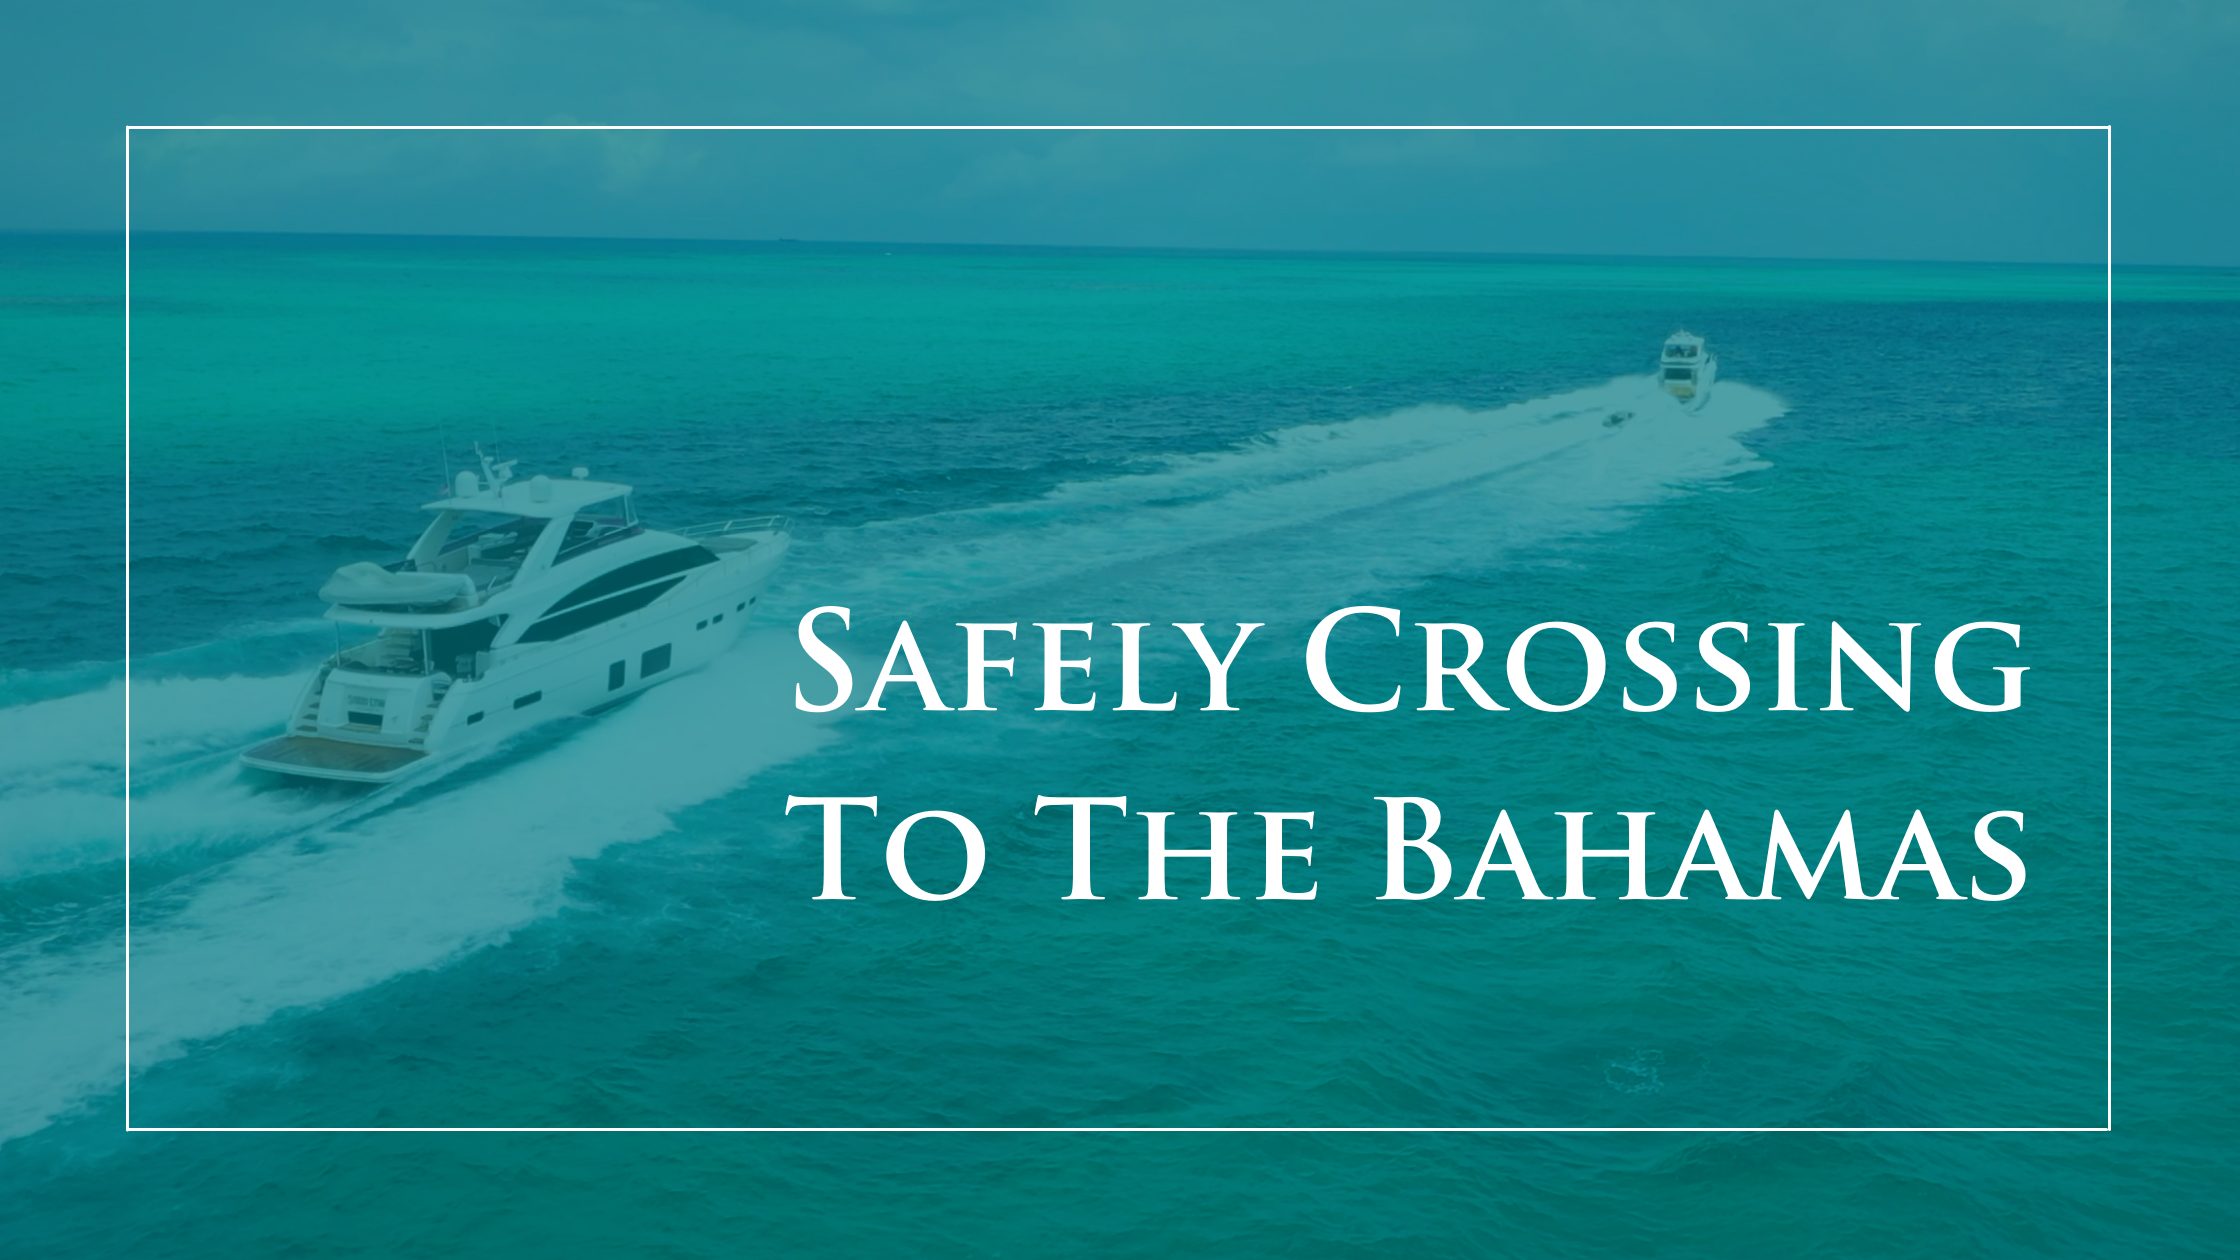 How to Prepare for a Safe and Successful Crossing to the Bahamas